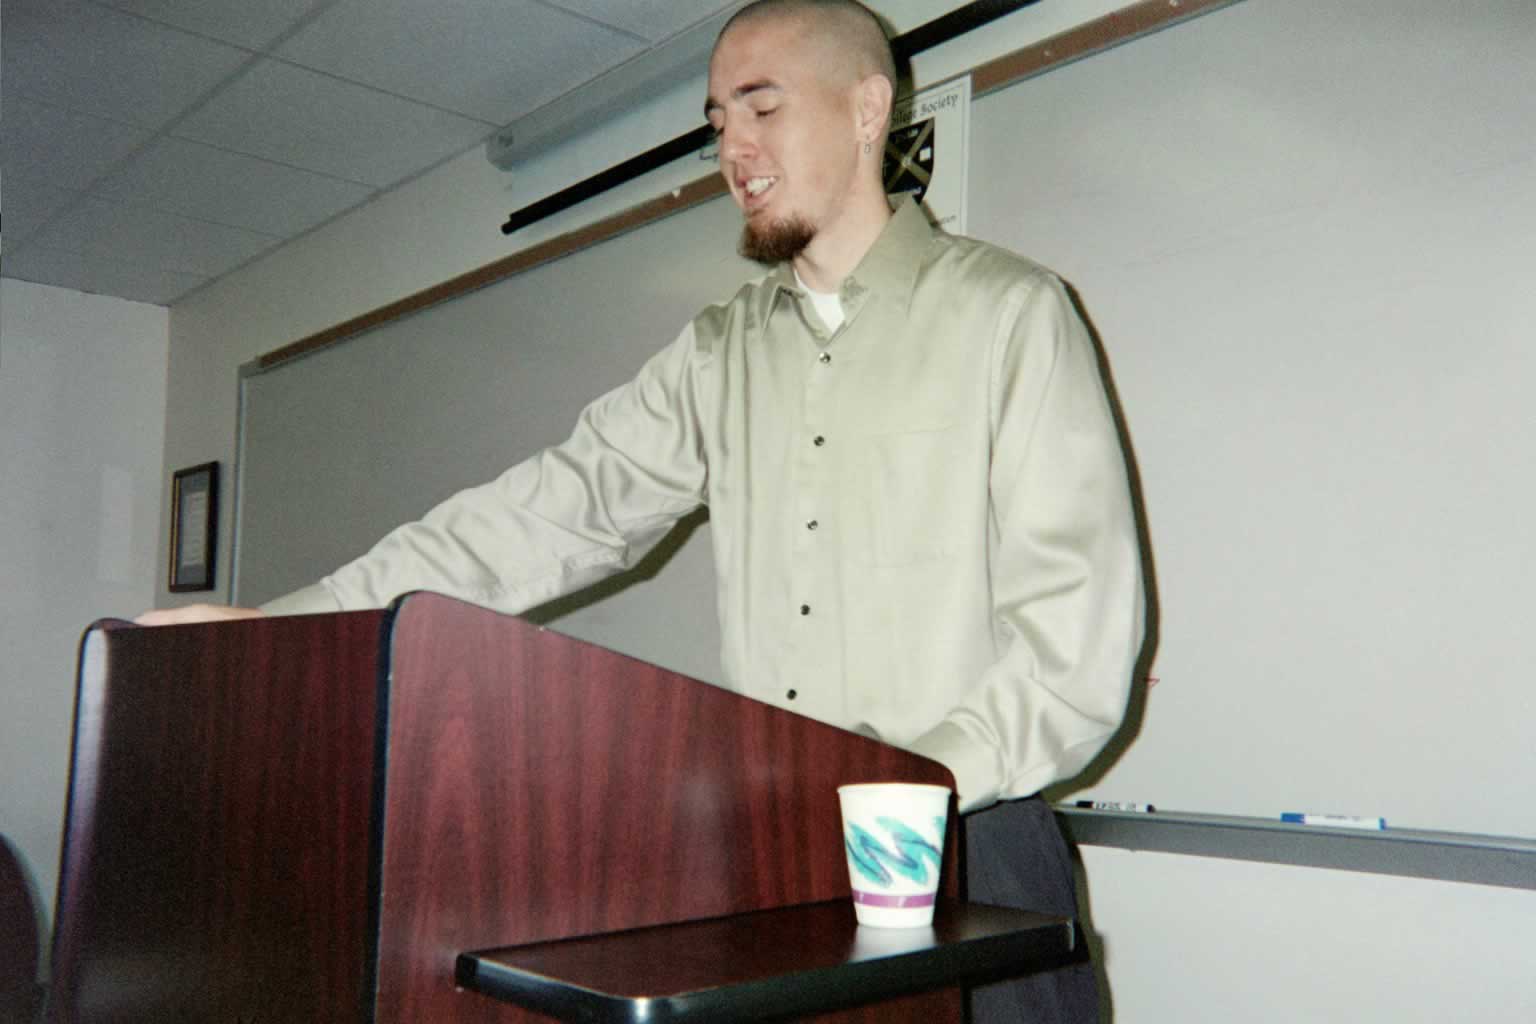 picture of a man standing behind a podium with a cup on the table next to him